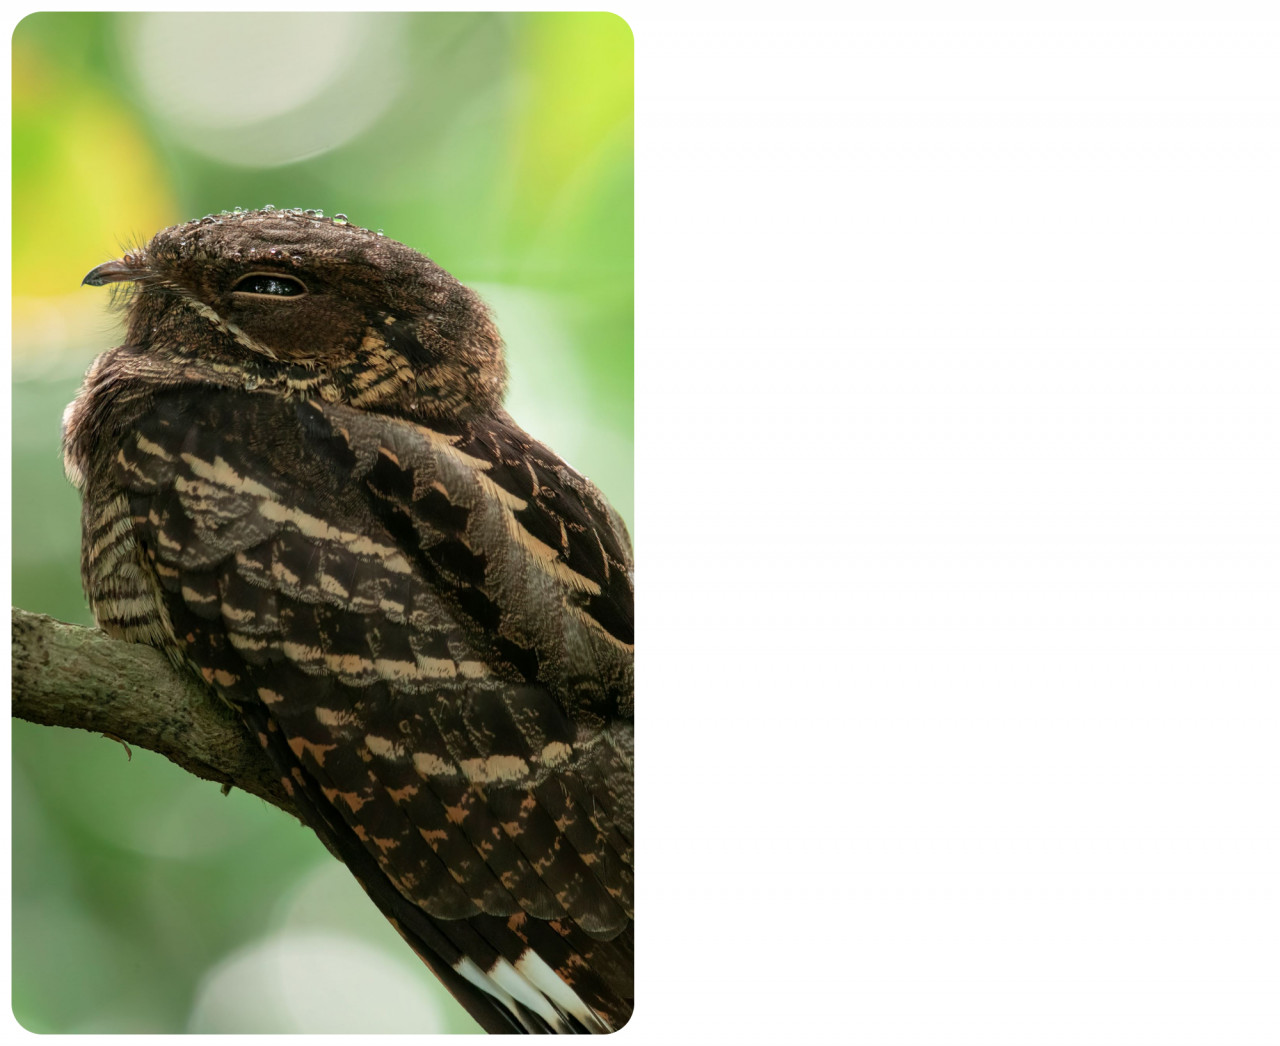 The Large Tailed Nightjar is fairly common nocturnal predator. It is also known locally as Burung Malas because it's main line of defence is camouflage. And so it will remain absolutely still - unless you get a bit too close for comfort. Even the rain doesn't phase it as he sits through a downpour, hoping that I won't notice his presence. – Pic courtesy of Peter Ong